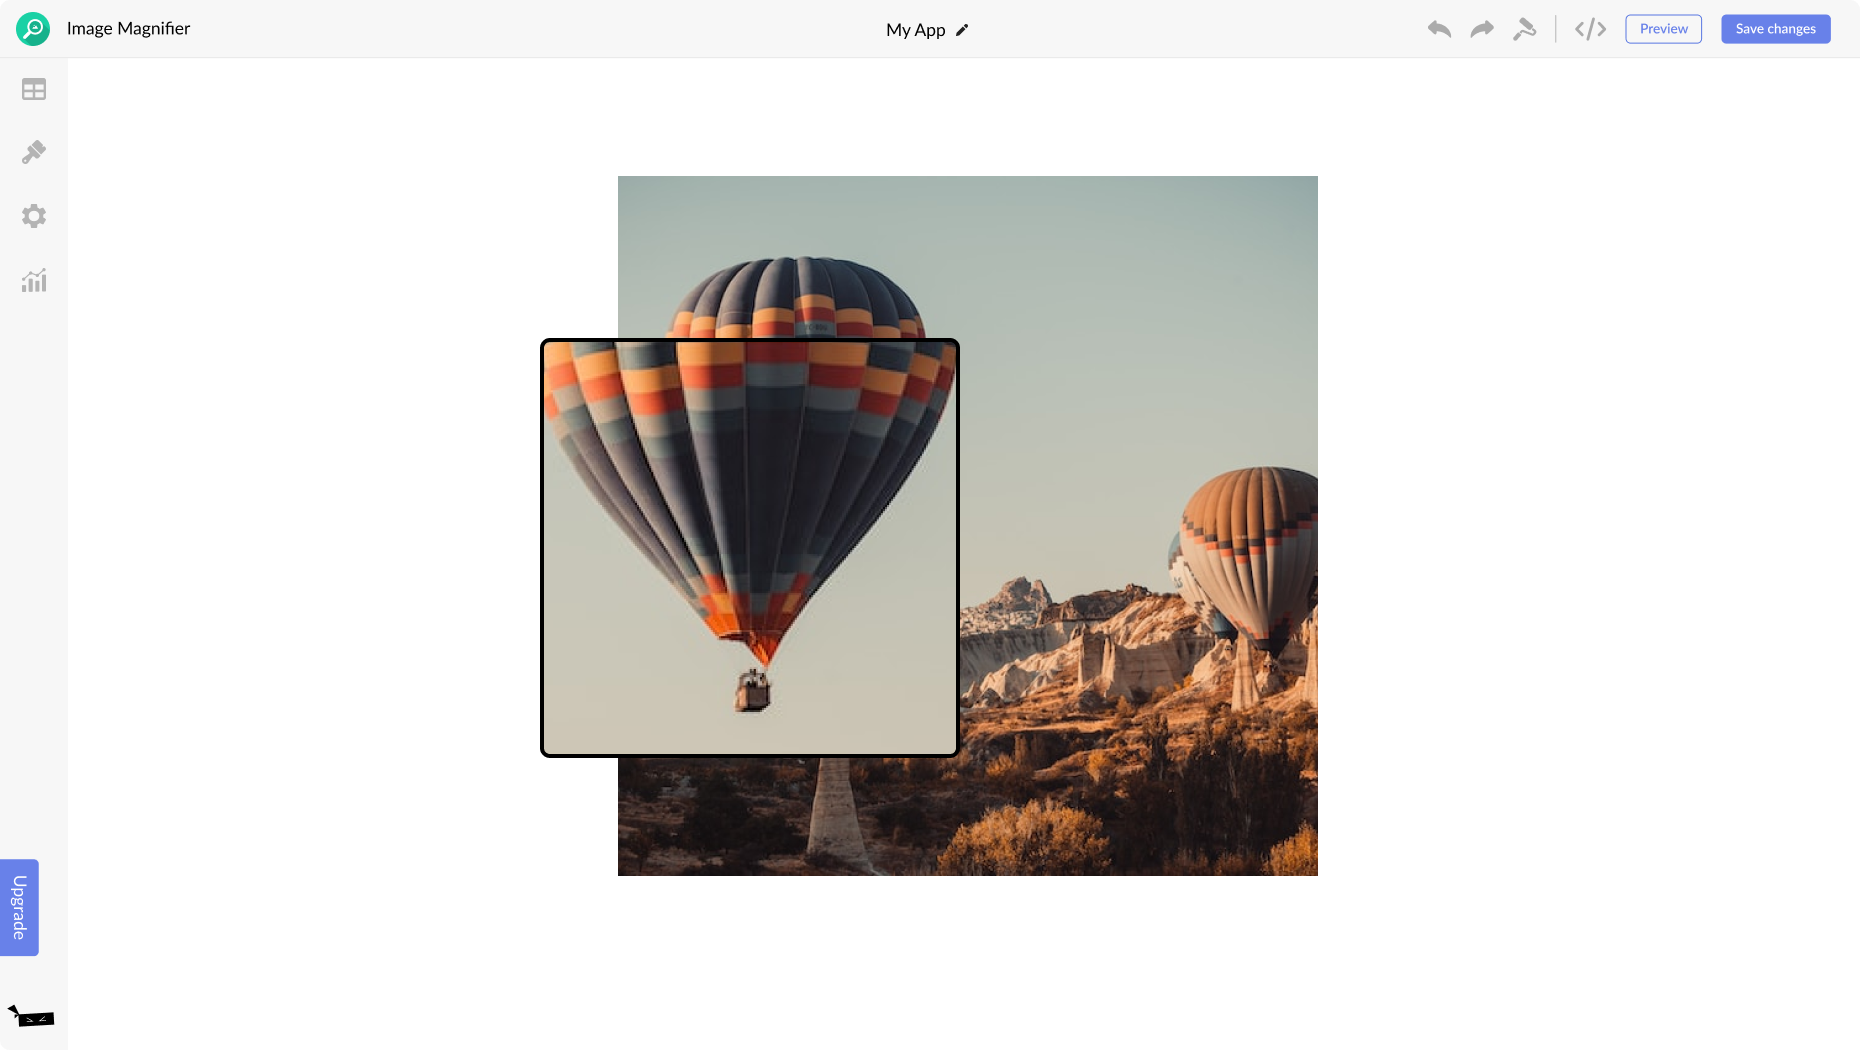 Image Magnifier for Microsoft Power Pages